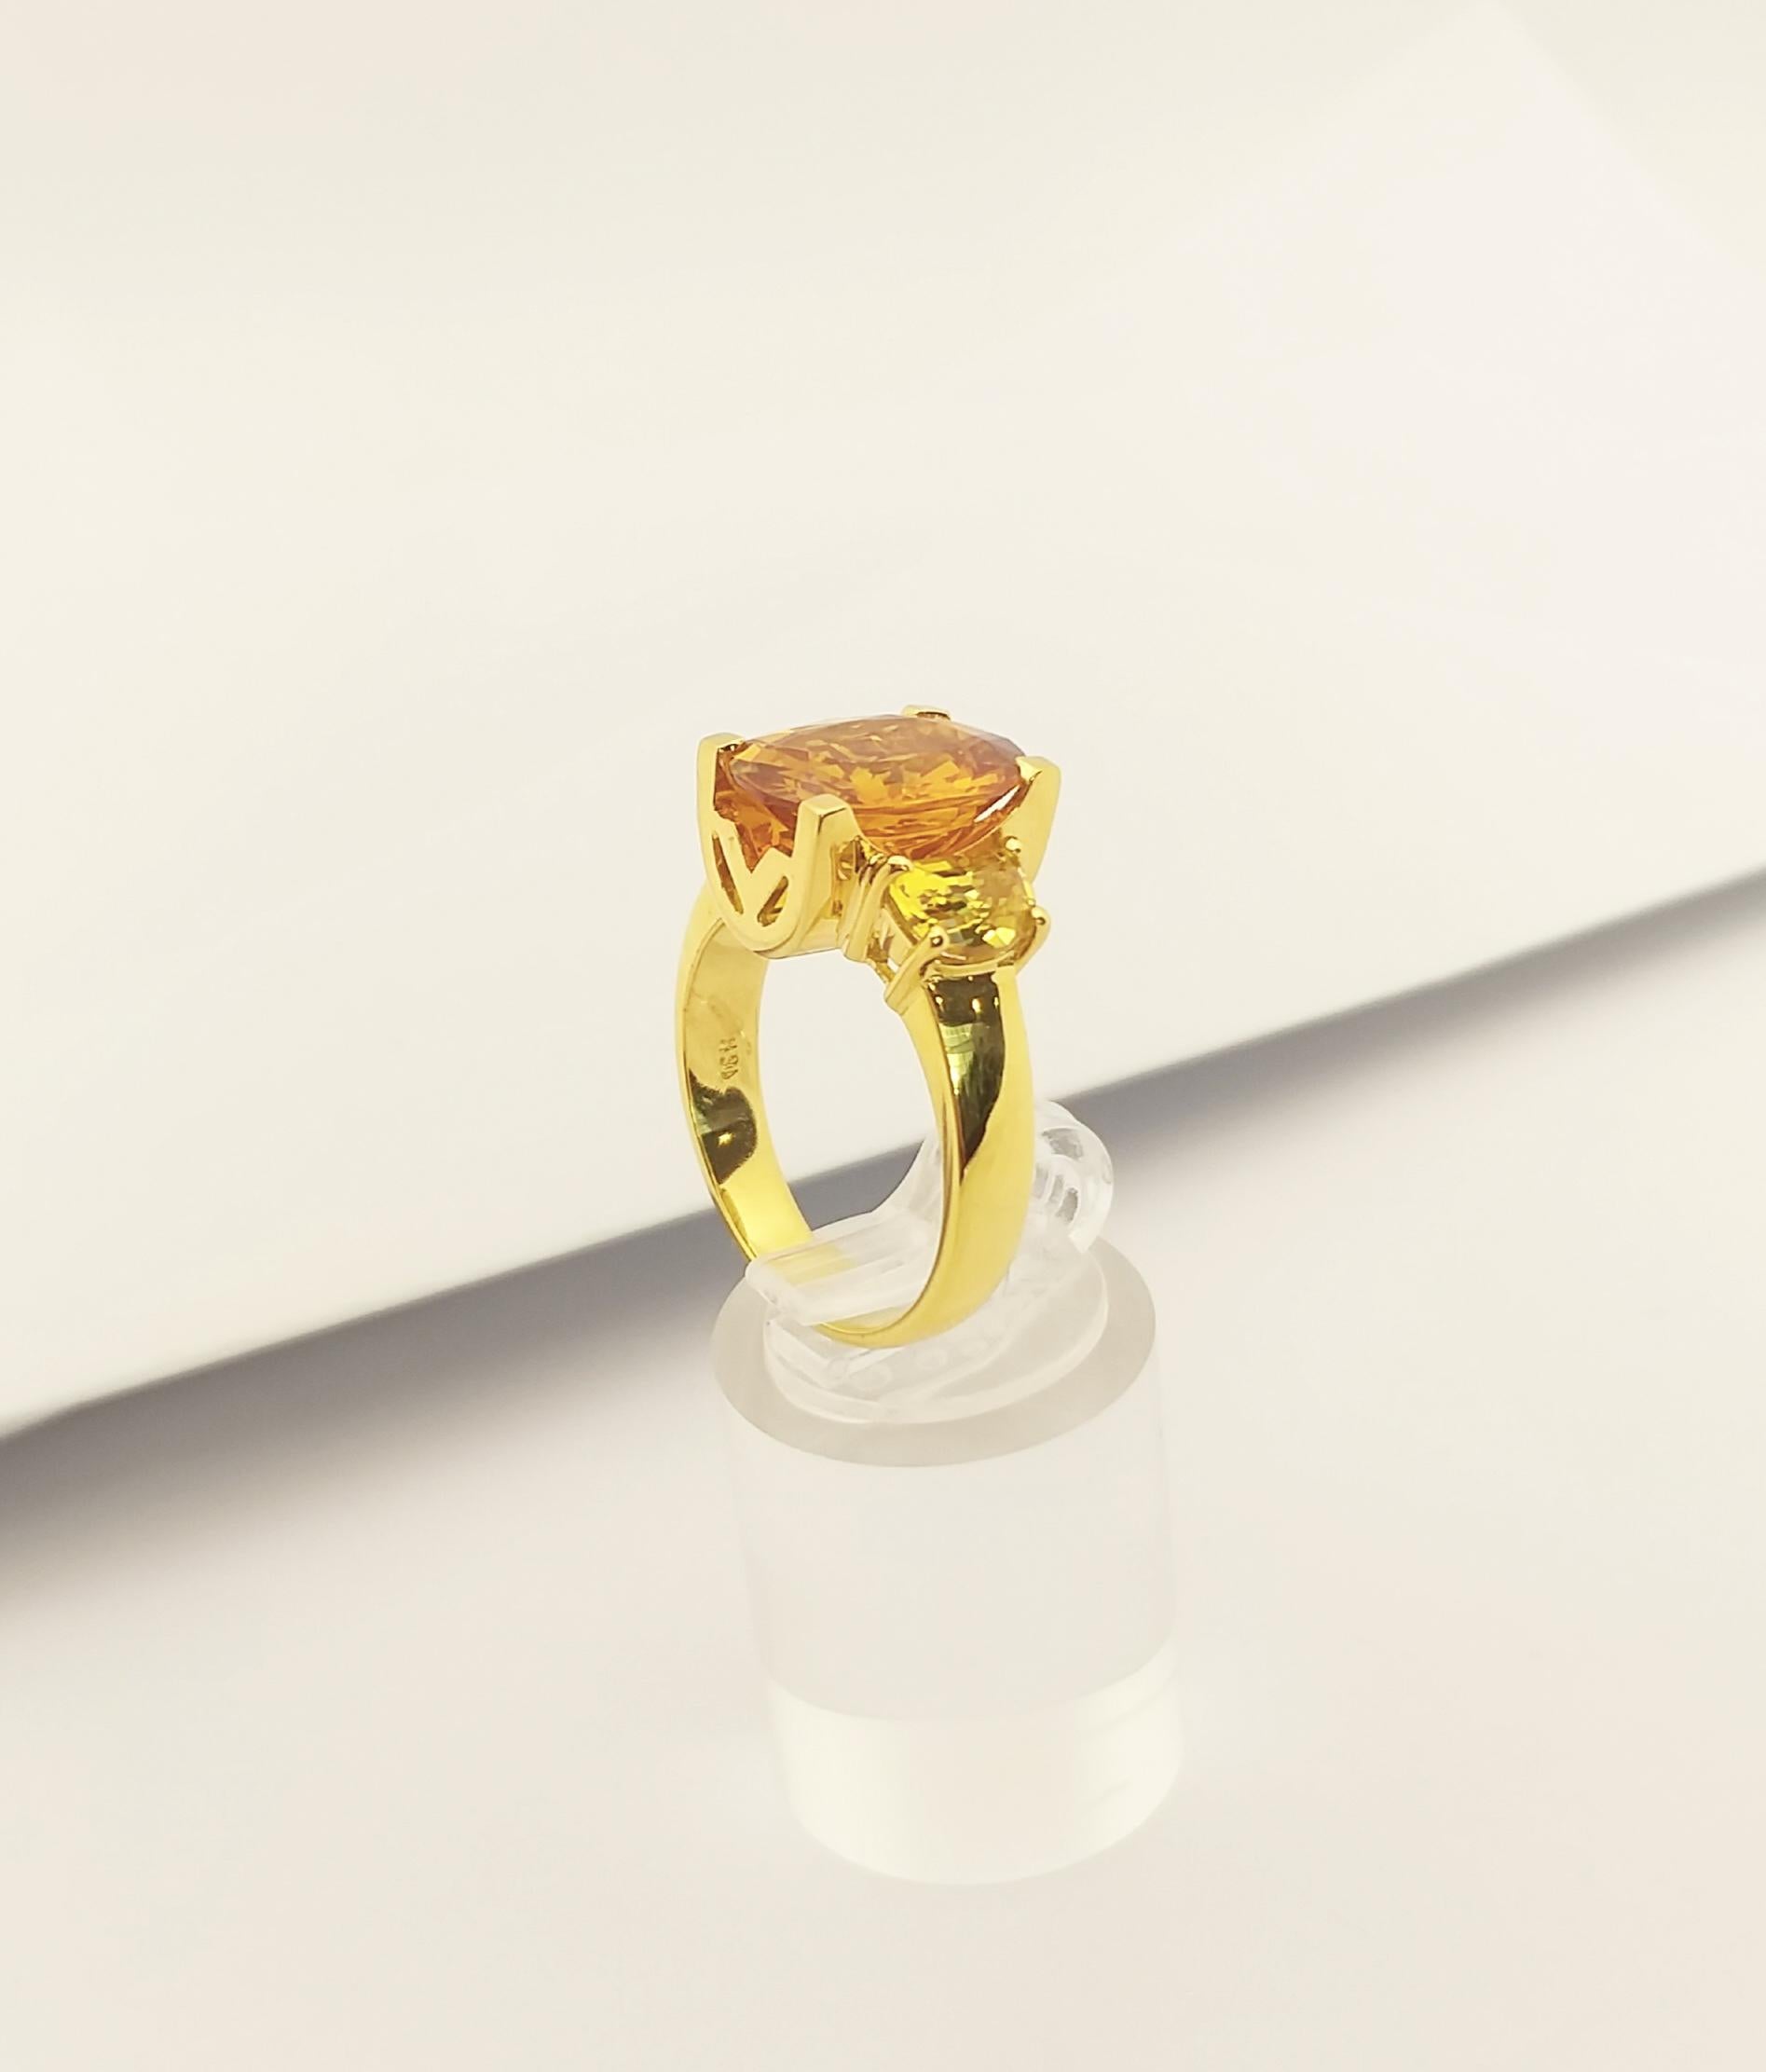 Yellow Sapphire 5.46 carats with Yellow Sapphire 1.87 carats Ring set in 18K Gold Settings

Width:  1.7 cm 
Length: 1.3 cm
Ring Size: 58
Total Weight: 11.93 grams

